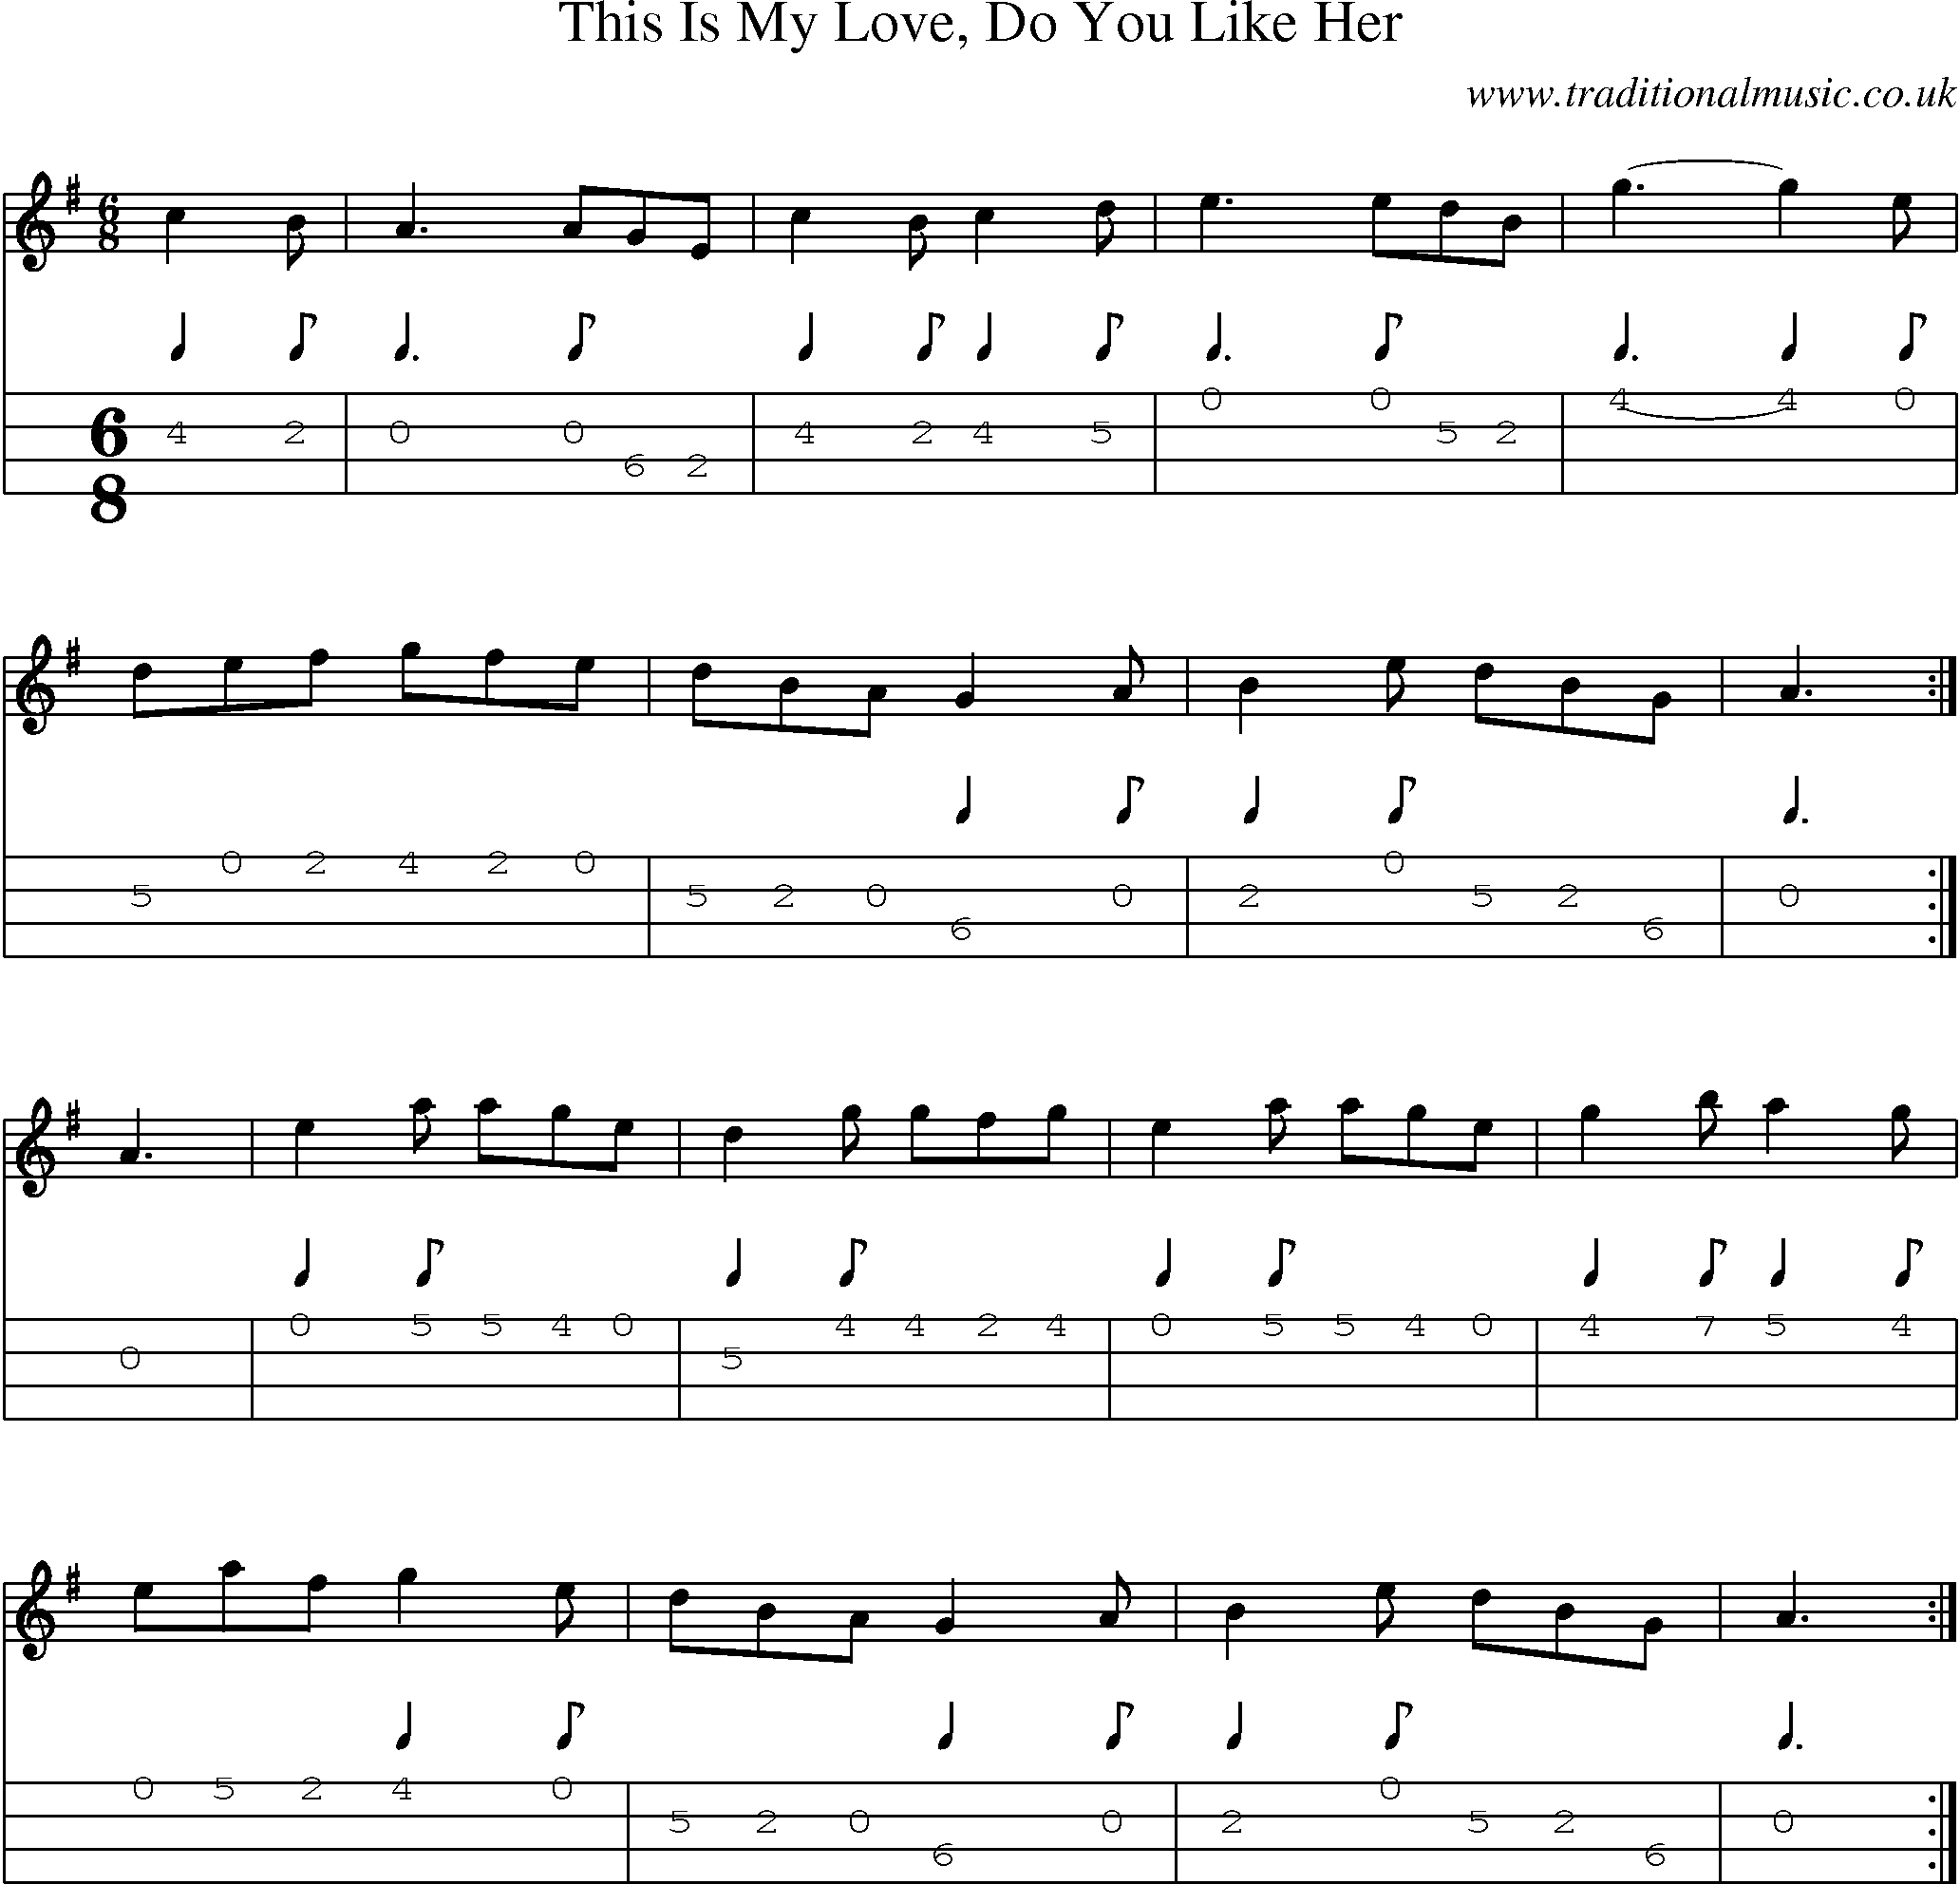 Music Score and Mandolin Tabs for This Is My Love Do You Like Her